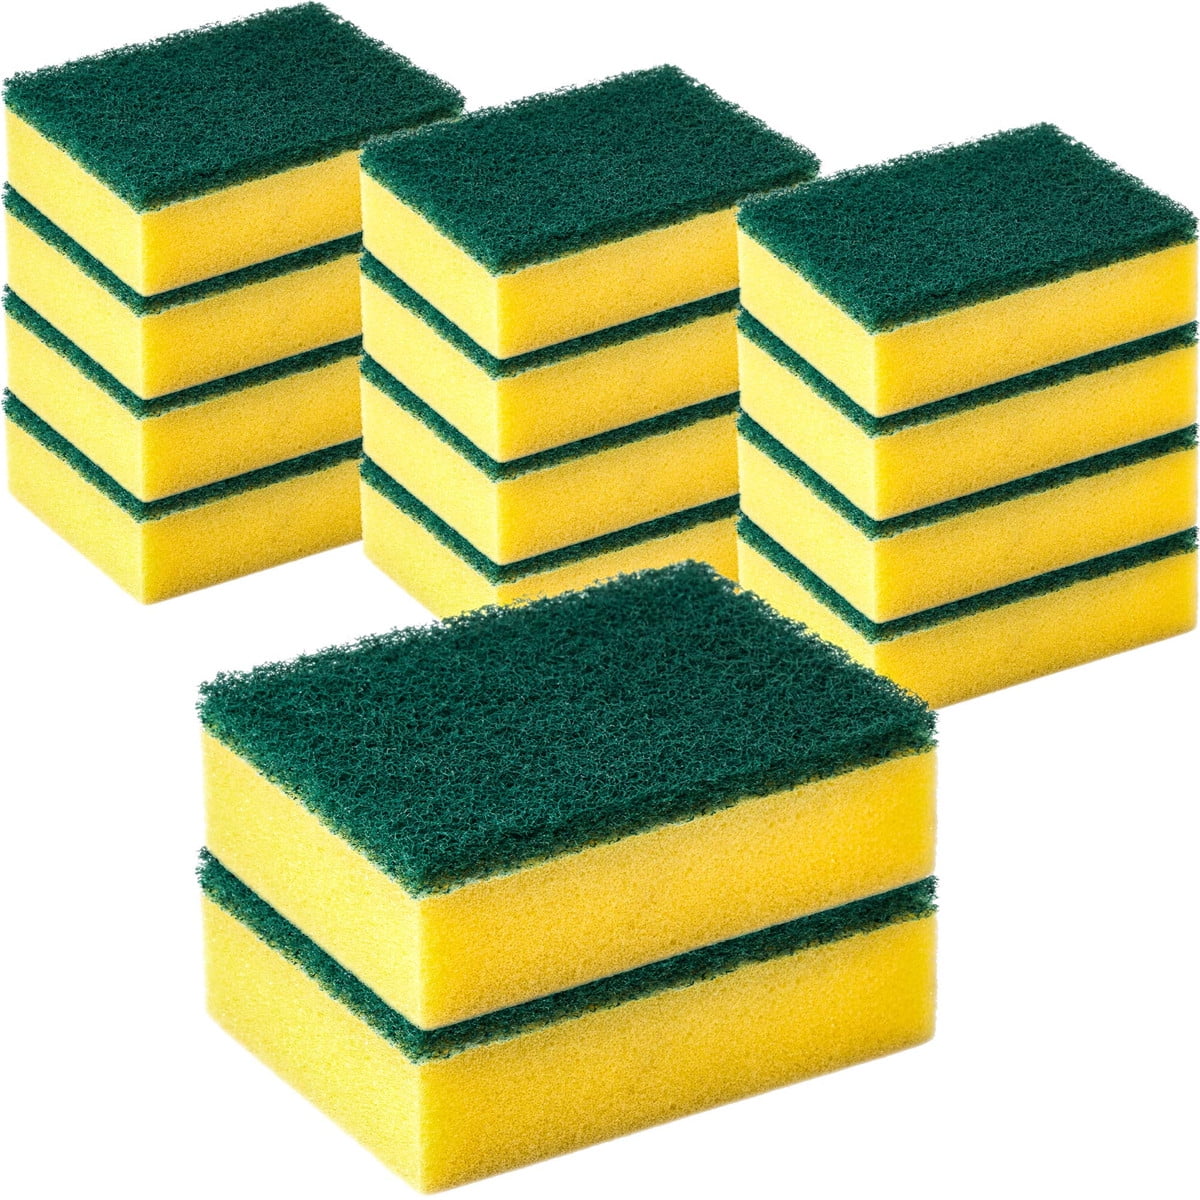  GOOSGUS Dish Sponges Kitchen for Cleaning 9 Pack, Cute